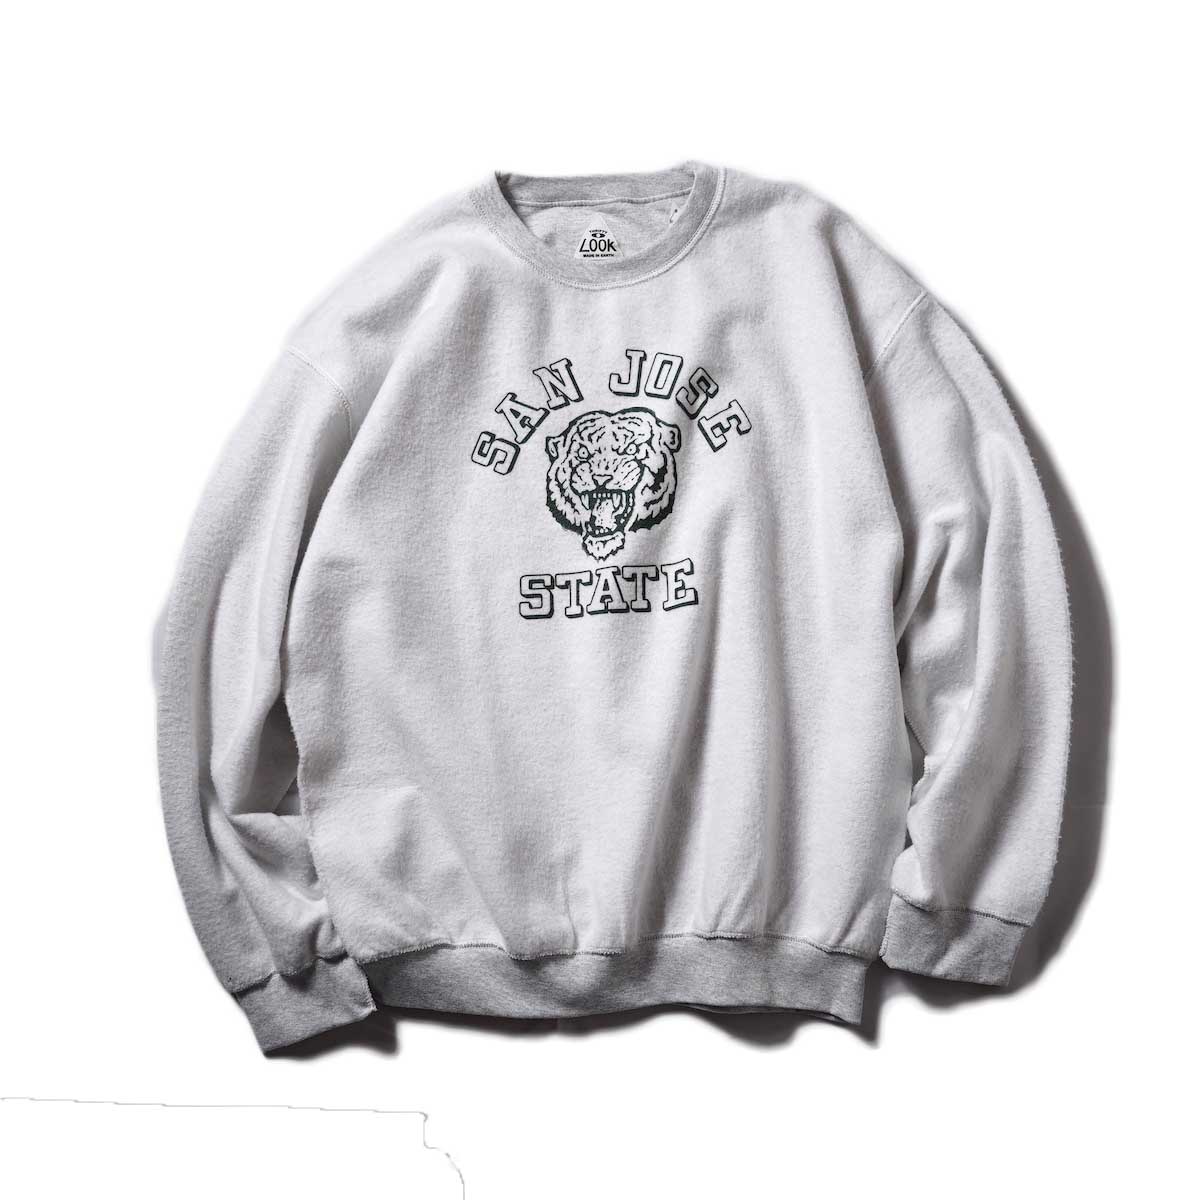 THRIFTY LOOK / OTHER SIDE PRINTED CREW SWEAT "SAN JOSE STATE" (ASH GREY)